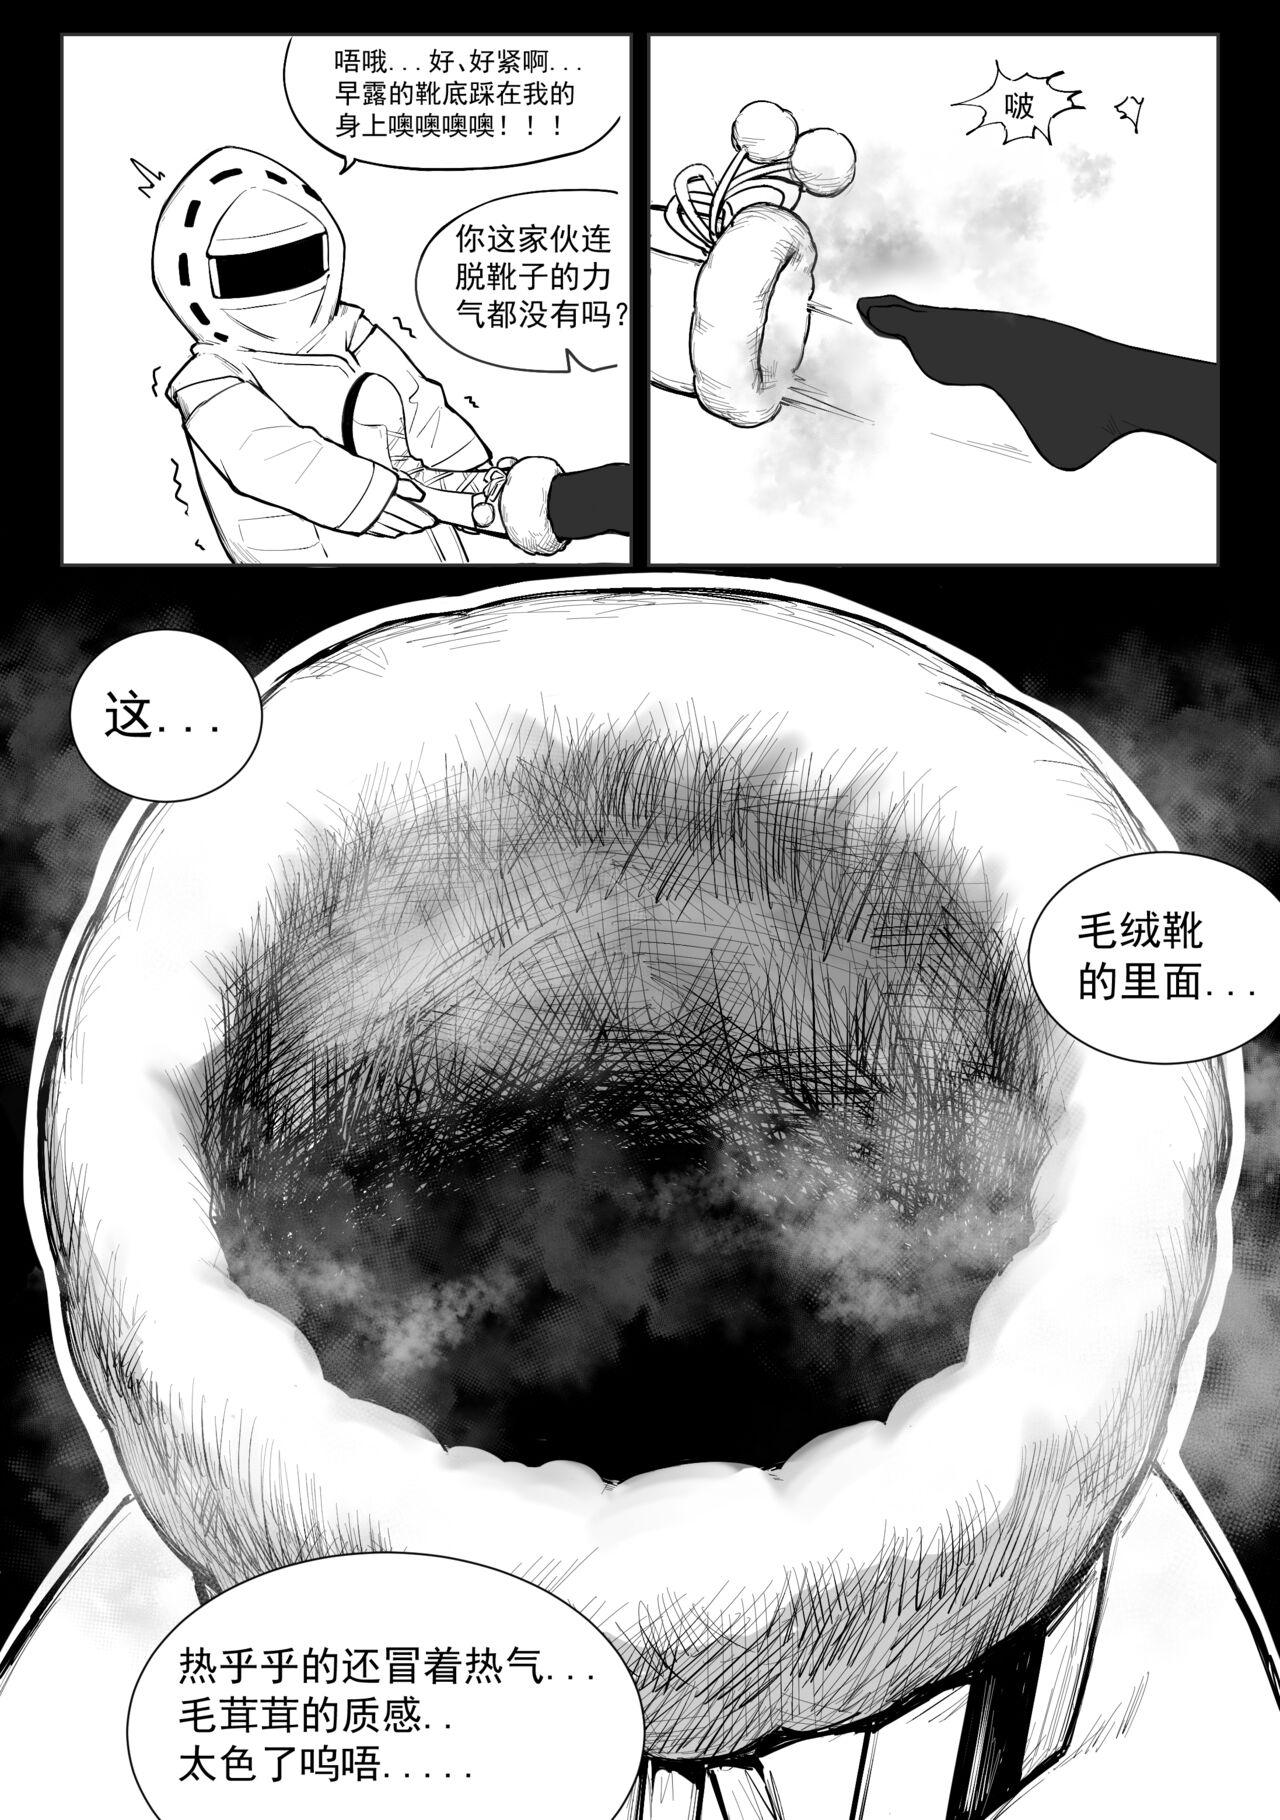 Nasty 澄澈之冰 早露 - Arknights Girlfriend - Page 2